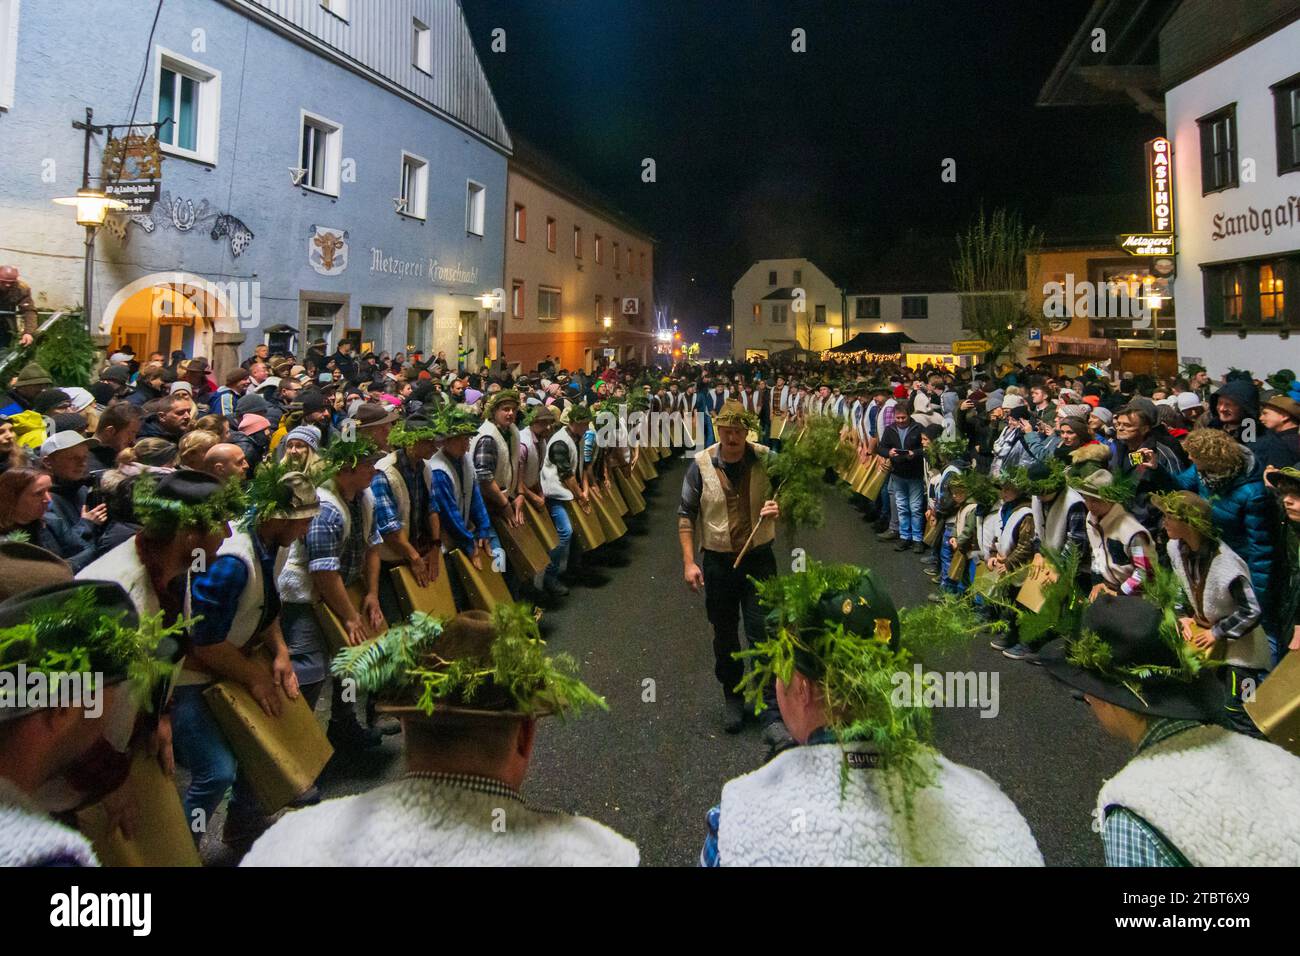 Rinchnach, regional customs Grosses Wolfauslassen (Big wolf release), 'Wolves' ring oversized 'cowbells' on November 10th in town center in Lower Bavaria, Bavaria, Germany Stock Photo